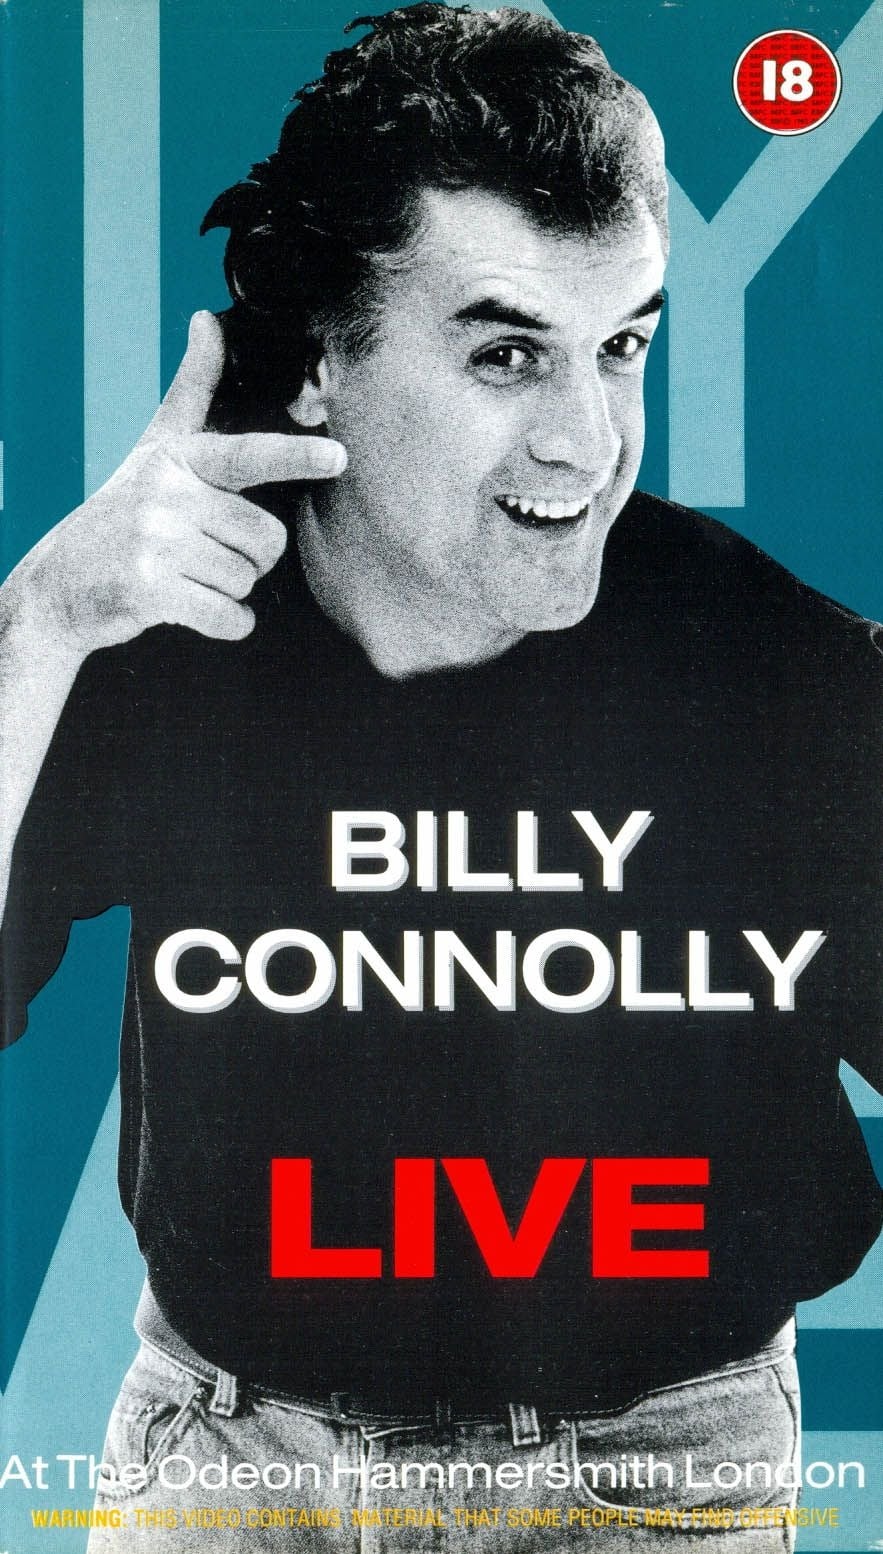 Billy Connolly - Live at the Odeon Hammersmith London (1991)